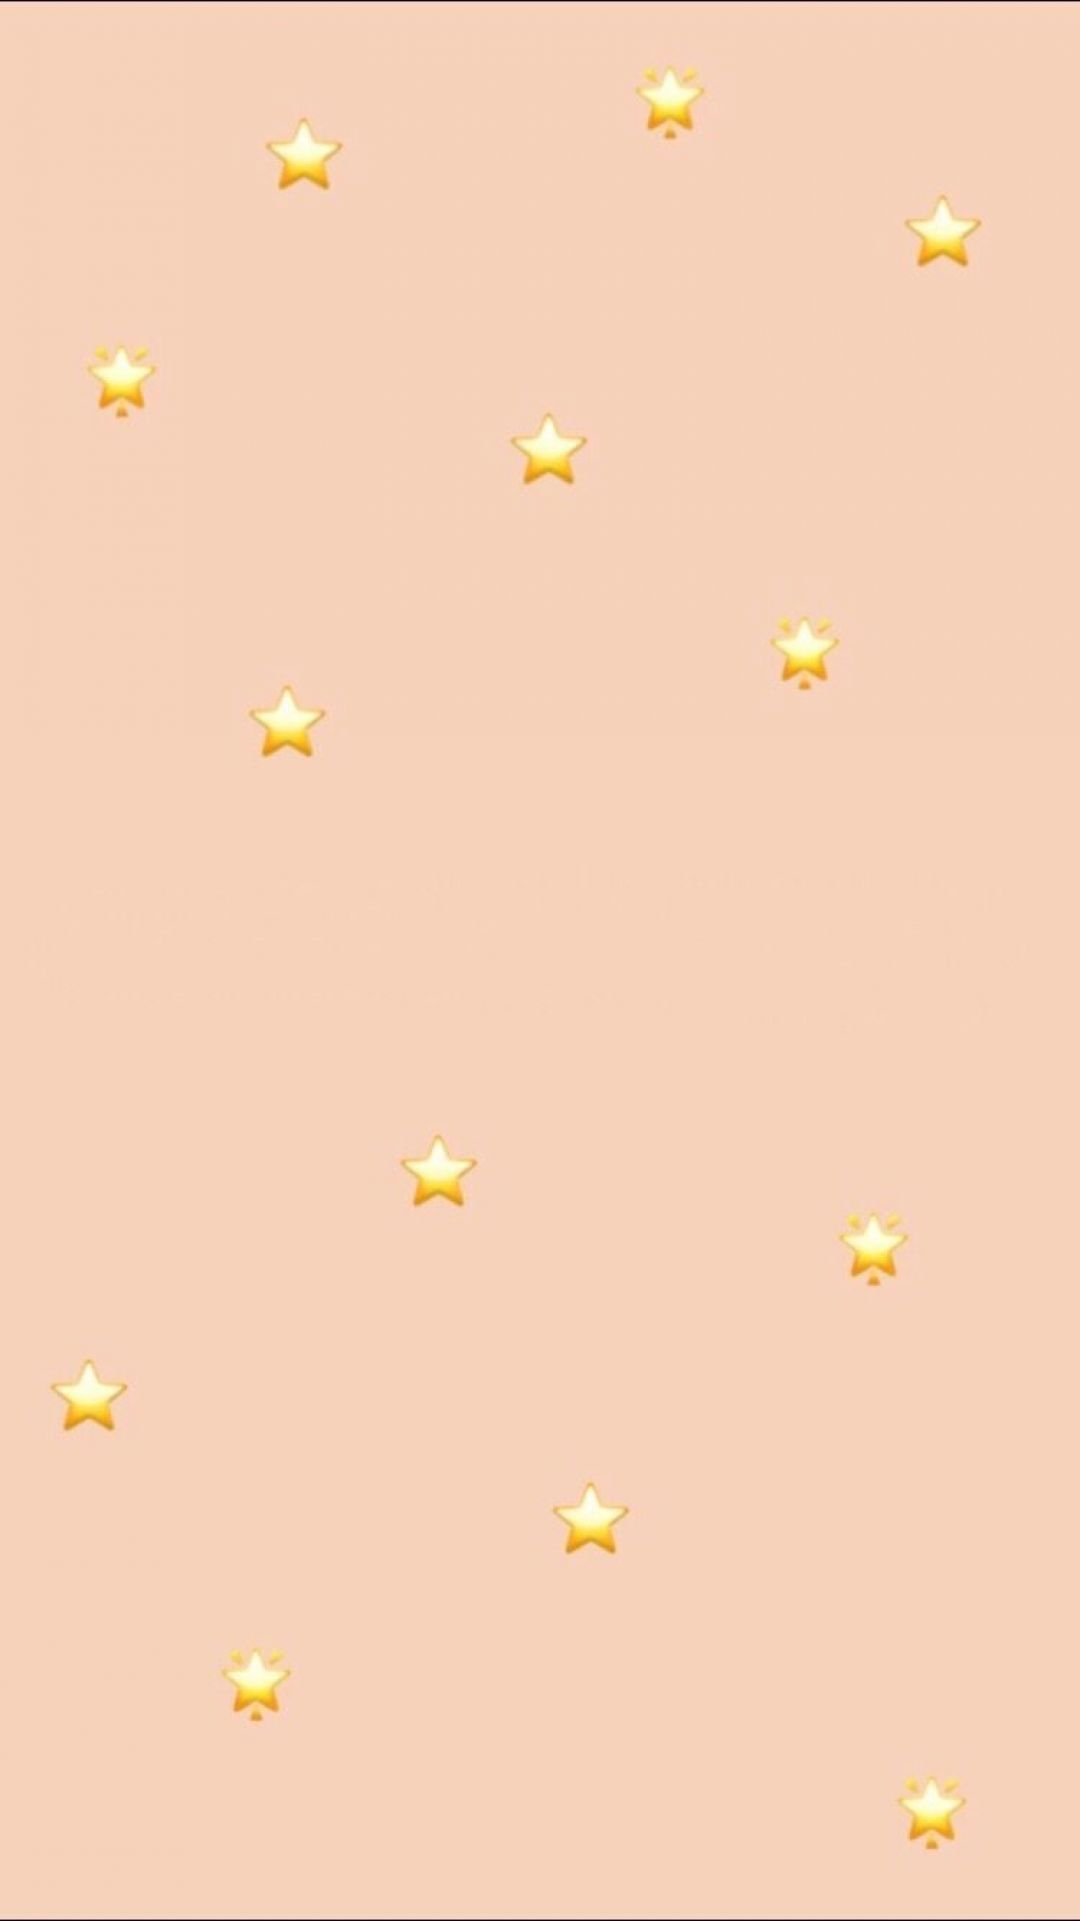 Wallpaper for phone, phone background, aesthetic background, aesthetic wallpaper, phone wallpaper, aesthetic, wallpaper, background, phone background, phone screensaver, phone wallpaper, phone background, phone screensaver, phone wallpaper, phone background, phone screensaver, phone wallpaper, phone background, phone screensaver - Emoji